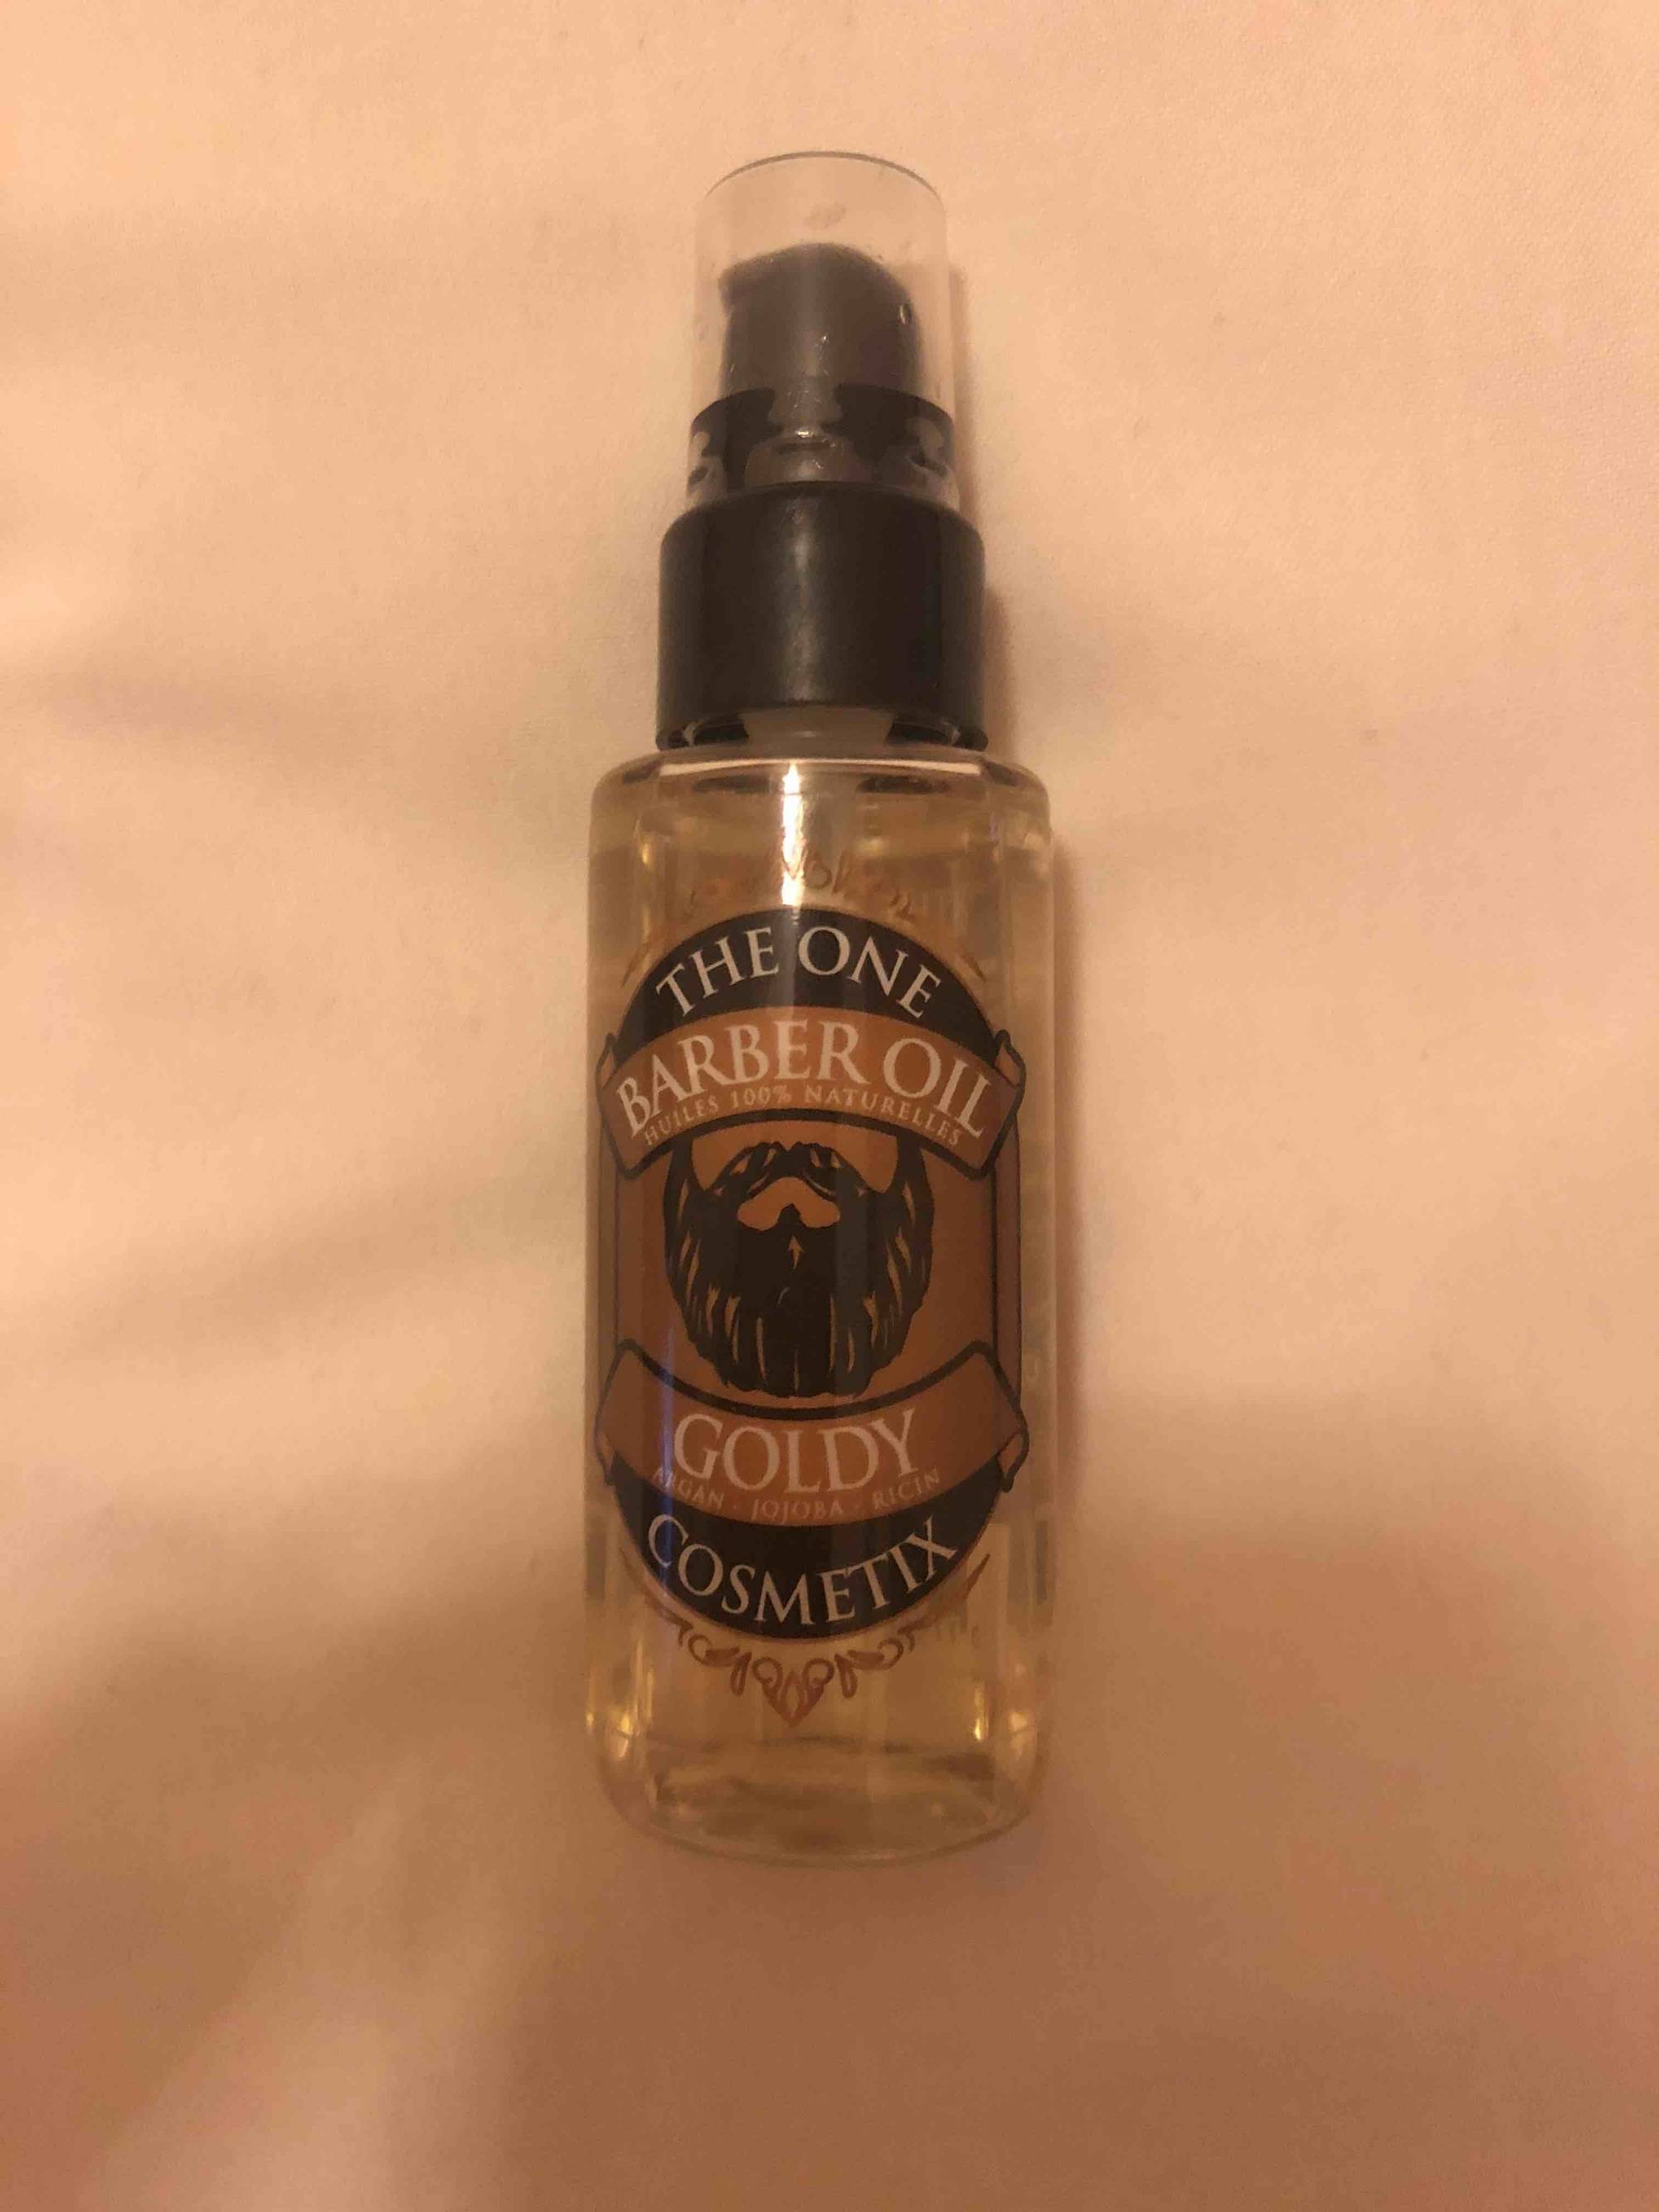 GOLDY COSMETIX - The one barber oil 